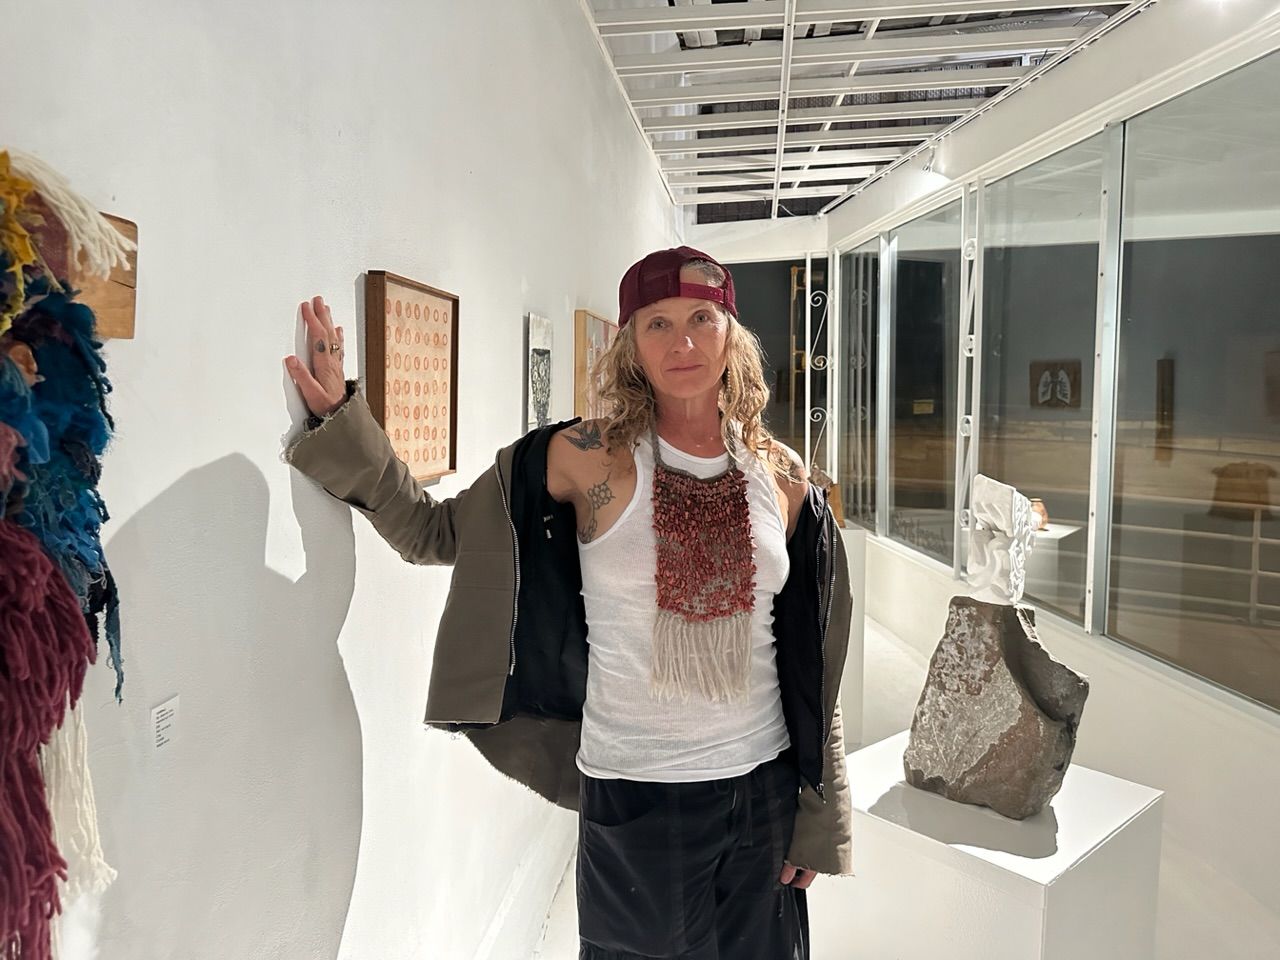 A woman stands in a gallery with white walls wearing a white shirt, red baseball cap, green jacket and a fiber sculpture necklace made of red coral and wool